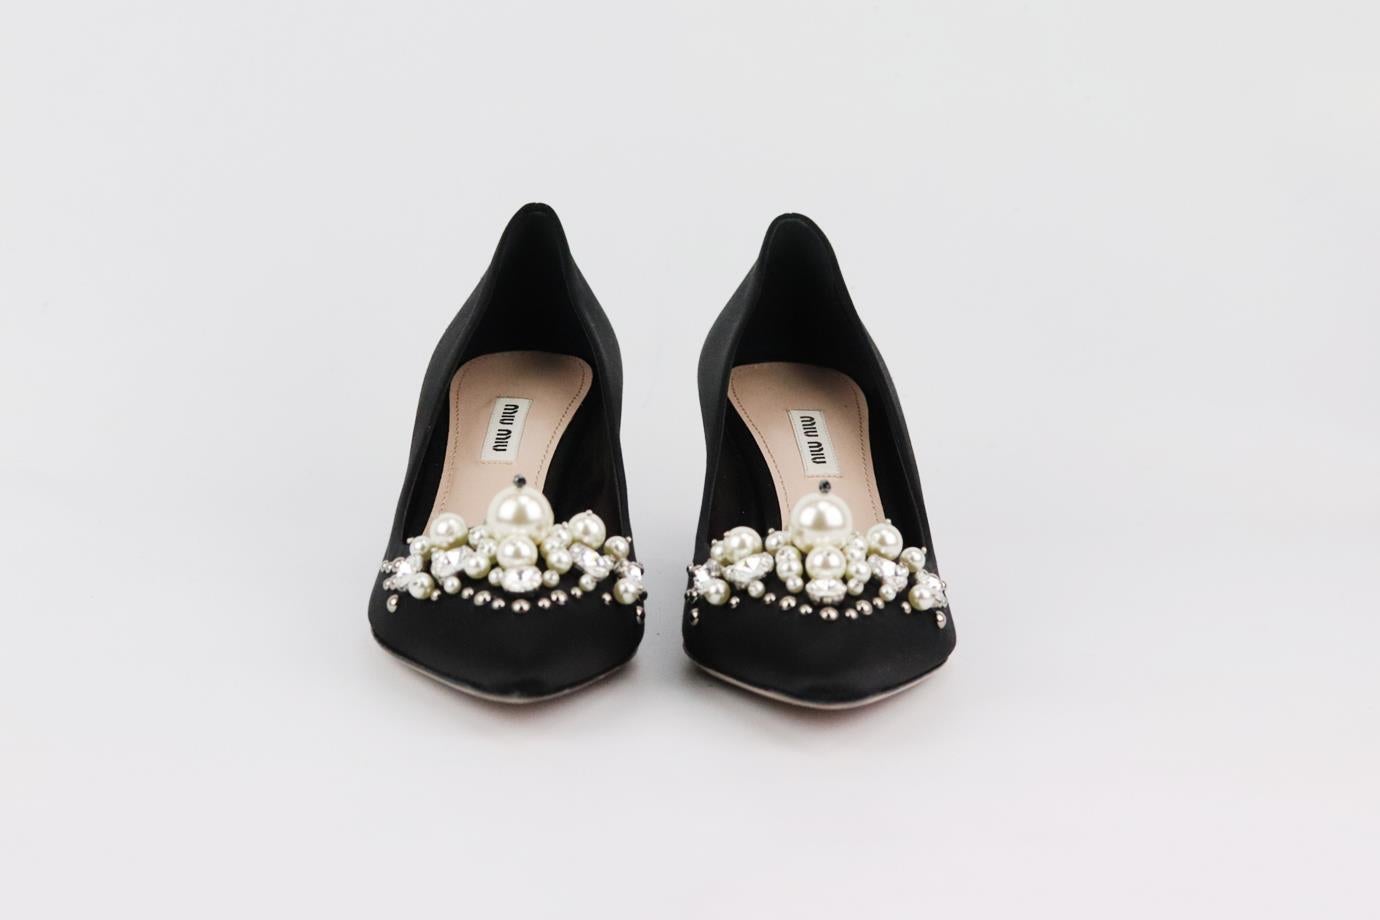 These pumps by Miu Miu are dotted with crystals and pearls along the sweetheart vamp, this point-toe pair has been made in Italy from lustrous black satin, they're set on sculptural 55mm heels. Heel measures approximately 55mm/ 2 inches. Black